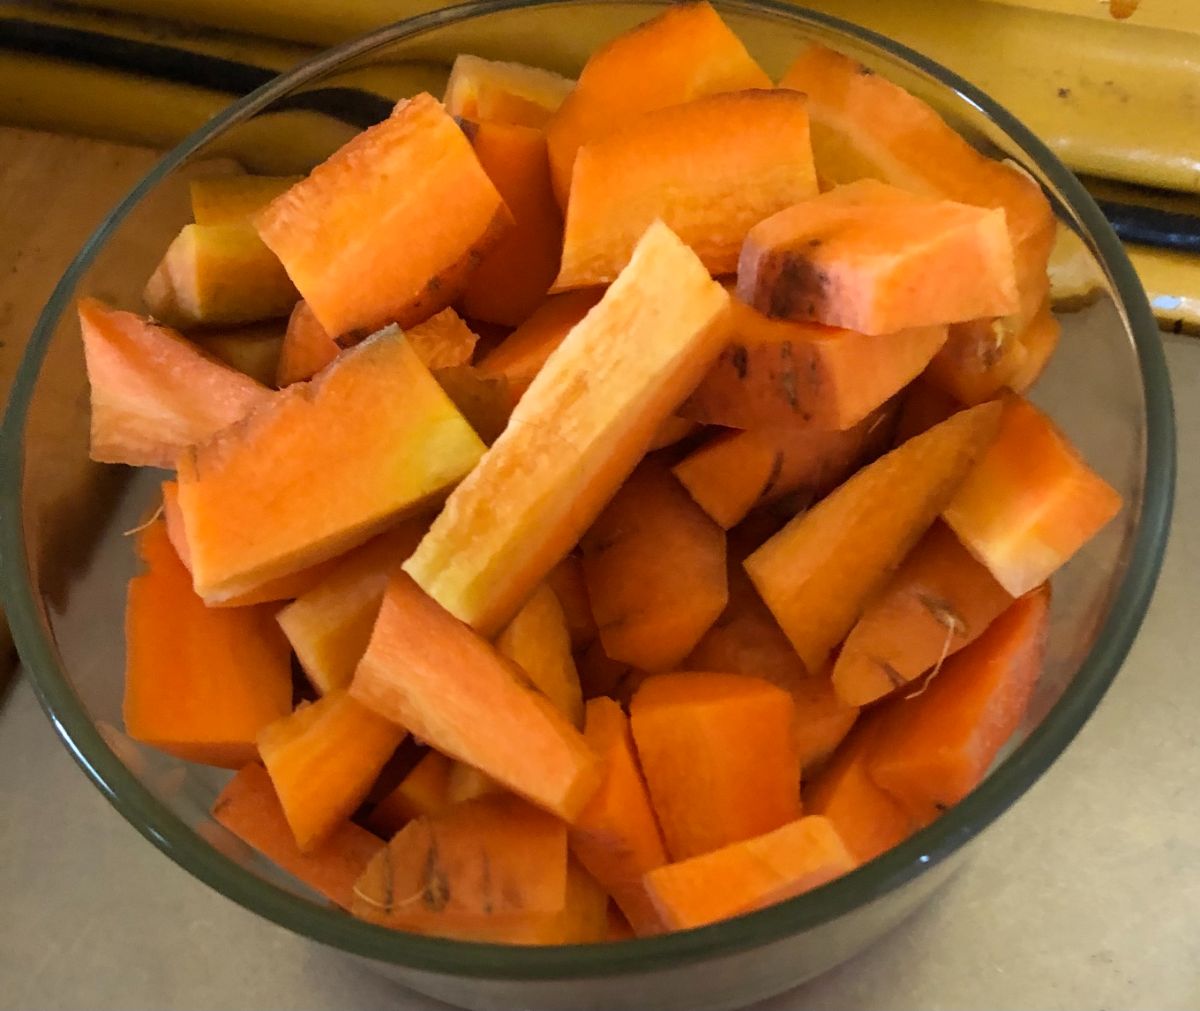 Carrots cut and dried for dehydrating